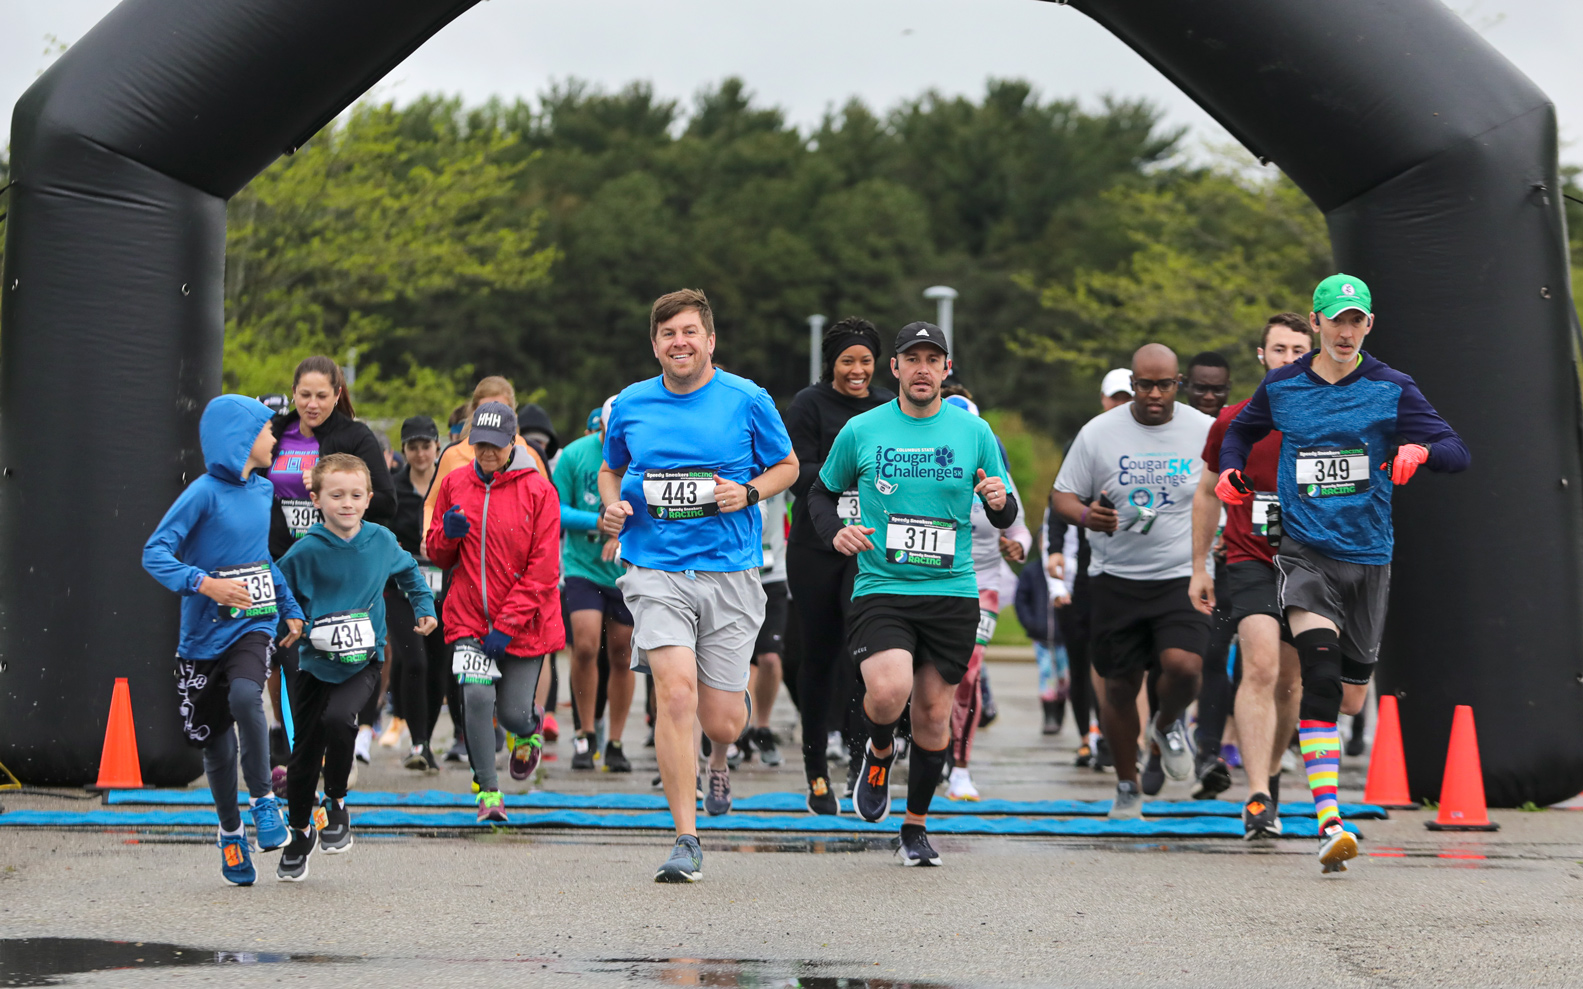 Runners take off as the annual 5K got under on Saturday, May 7 on the Delaware Campus. Brett Welsh, wearing the light blue shirt and number 443, finished in first place with a time of 19 minutes and 16 seconds. Welsh is the director of Student Engagement & Inclusion